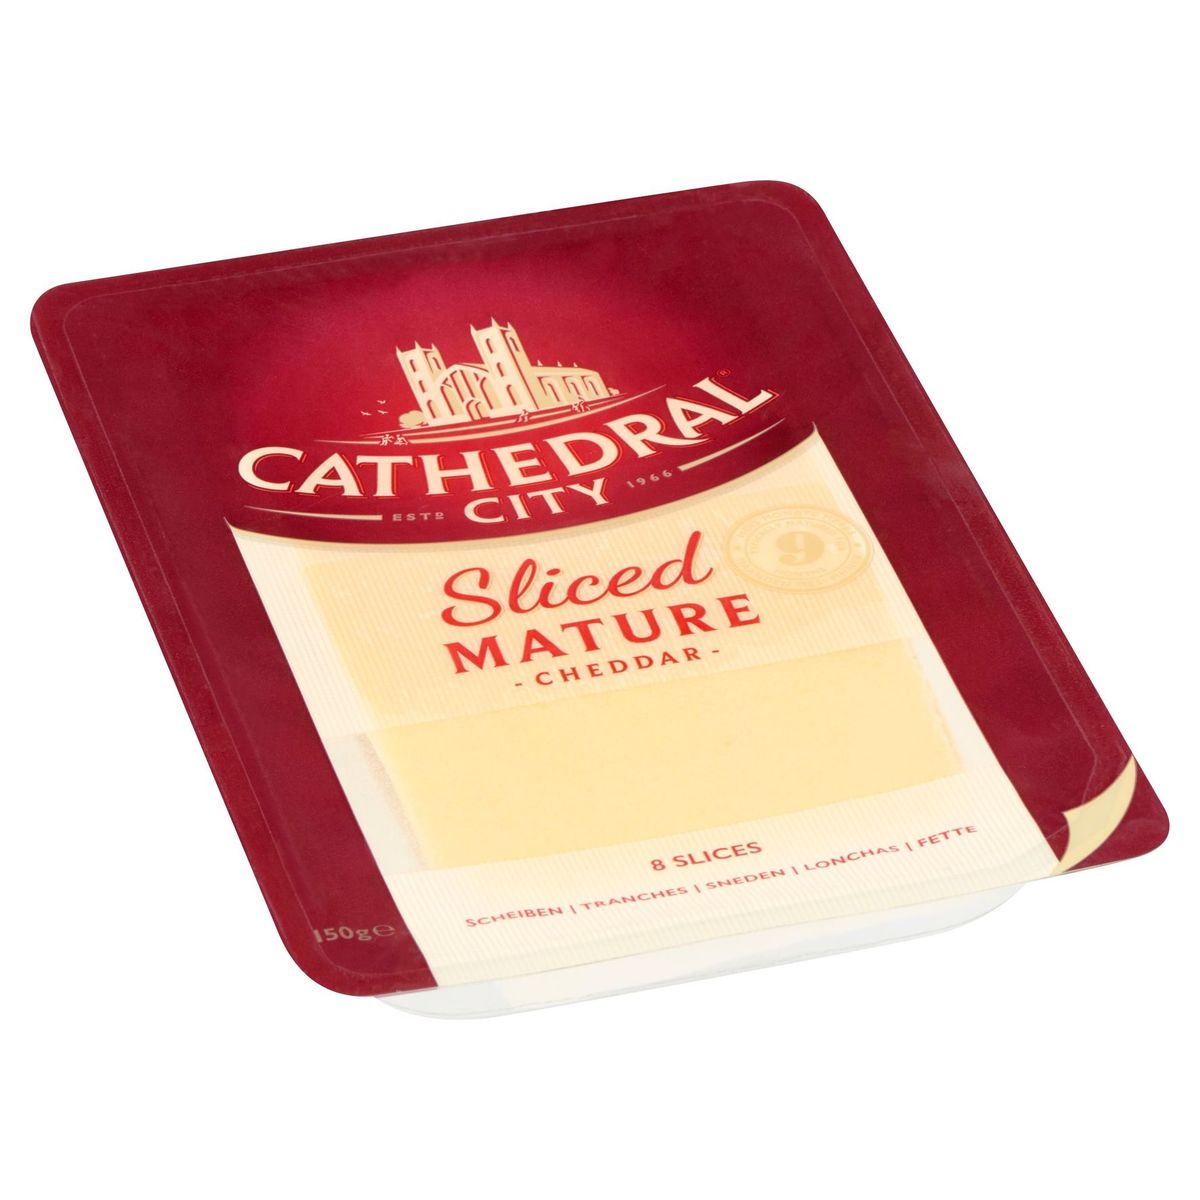 Cathedral City Cheddar Sliced Mature 8 Tranches 150 g